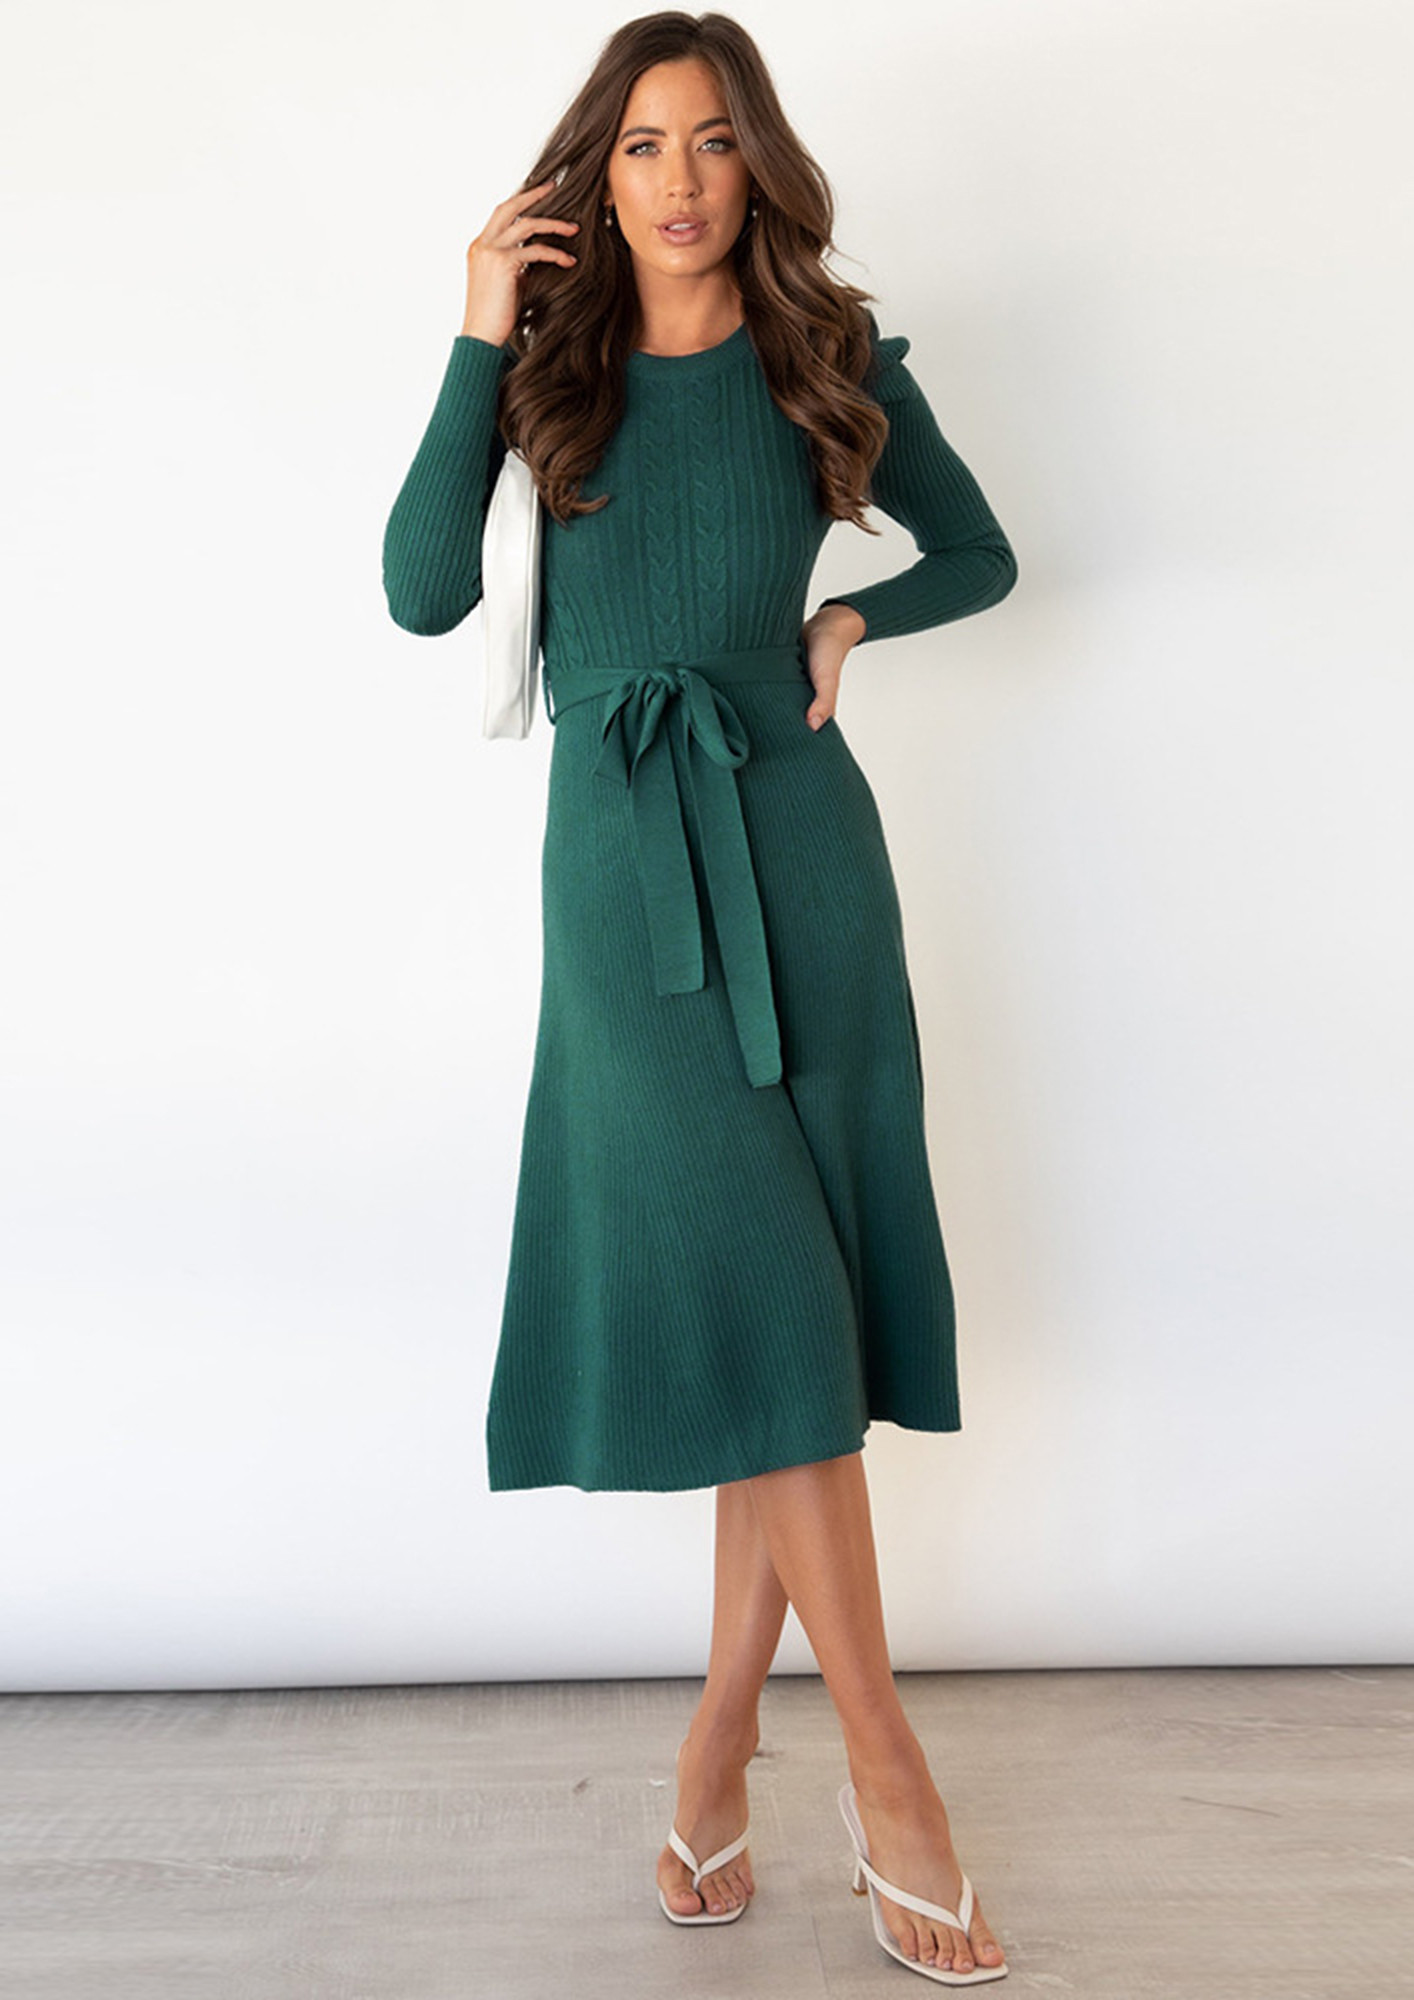 BELT AND SOLID GREEN DRESS